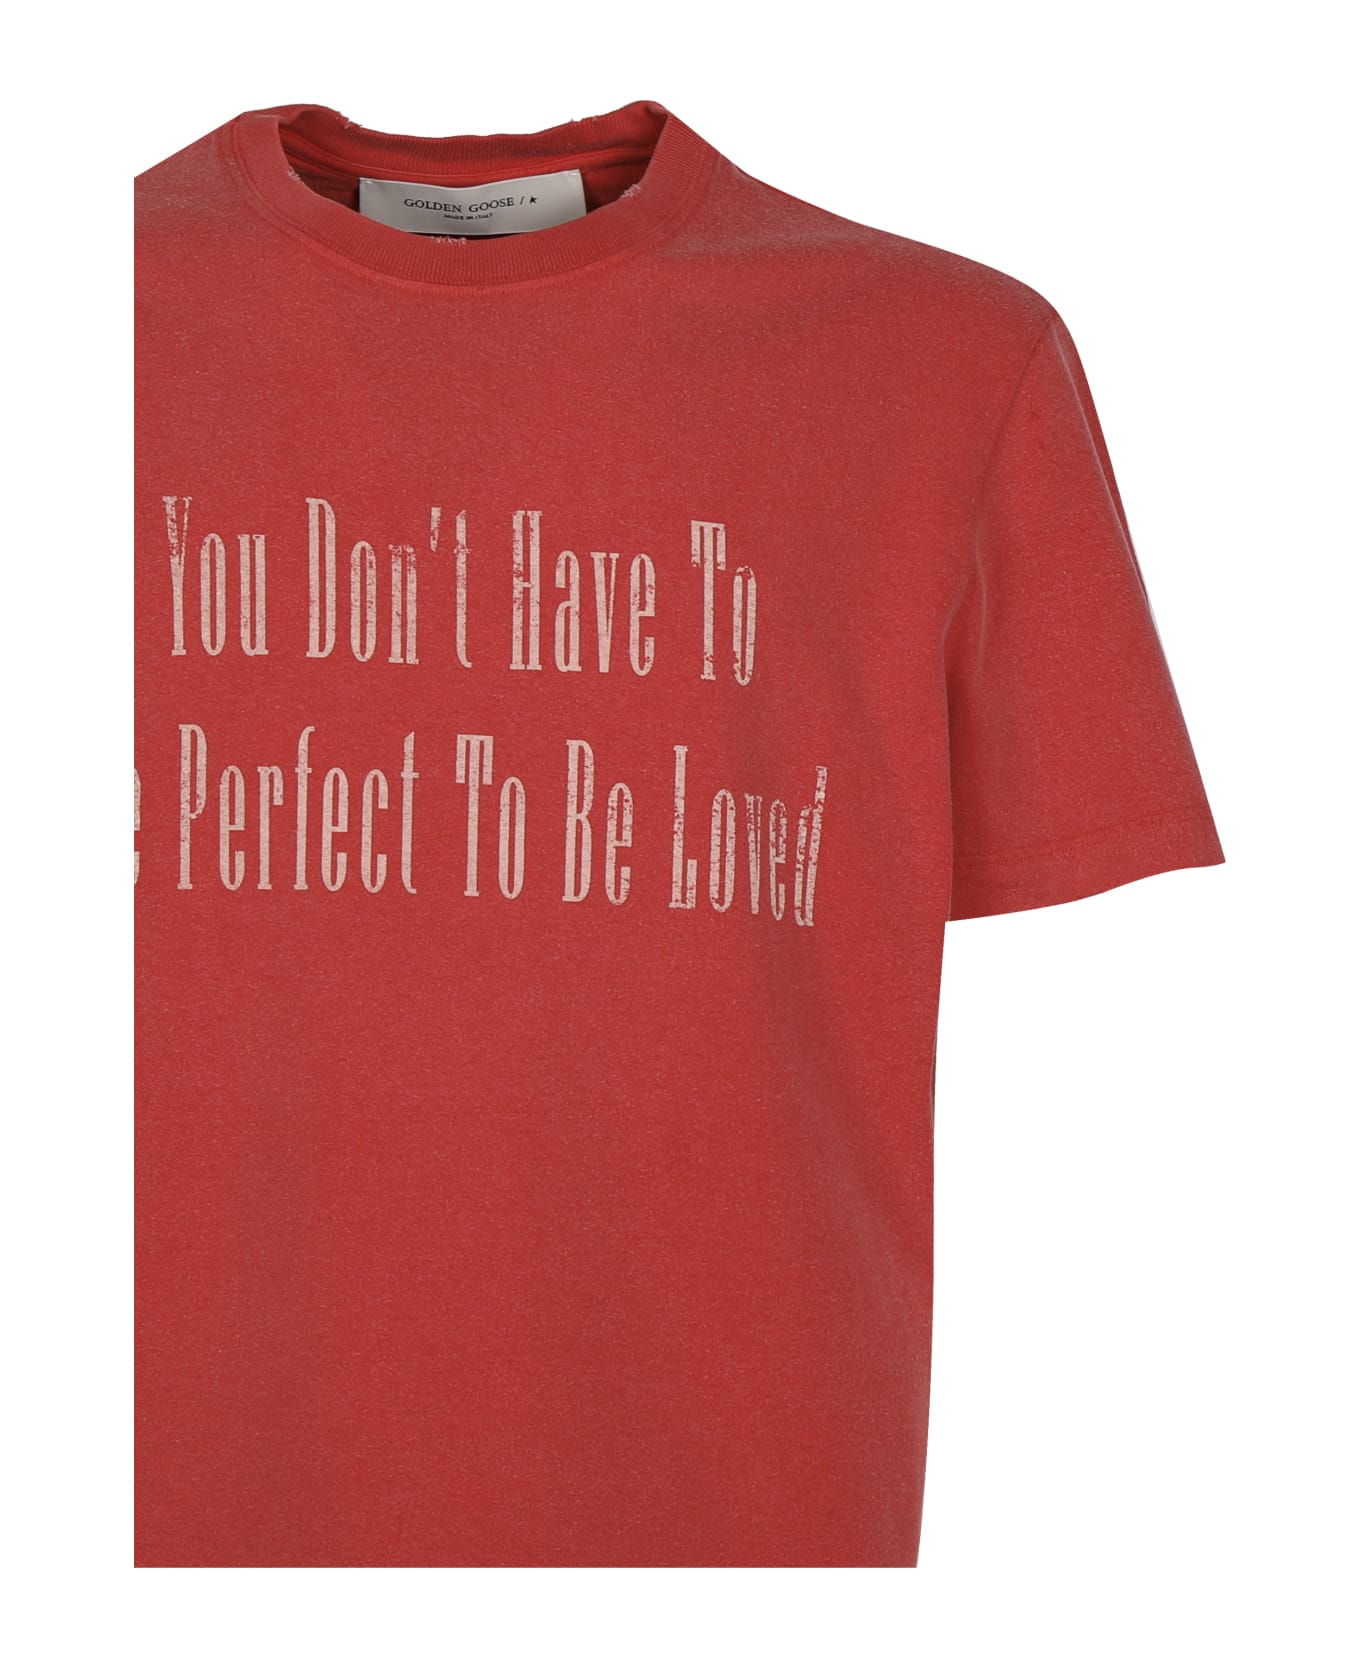 Golden Goose T-shirt With Printed Lettering - Tango red/ ecru'